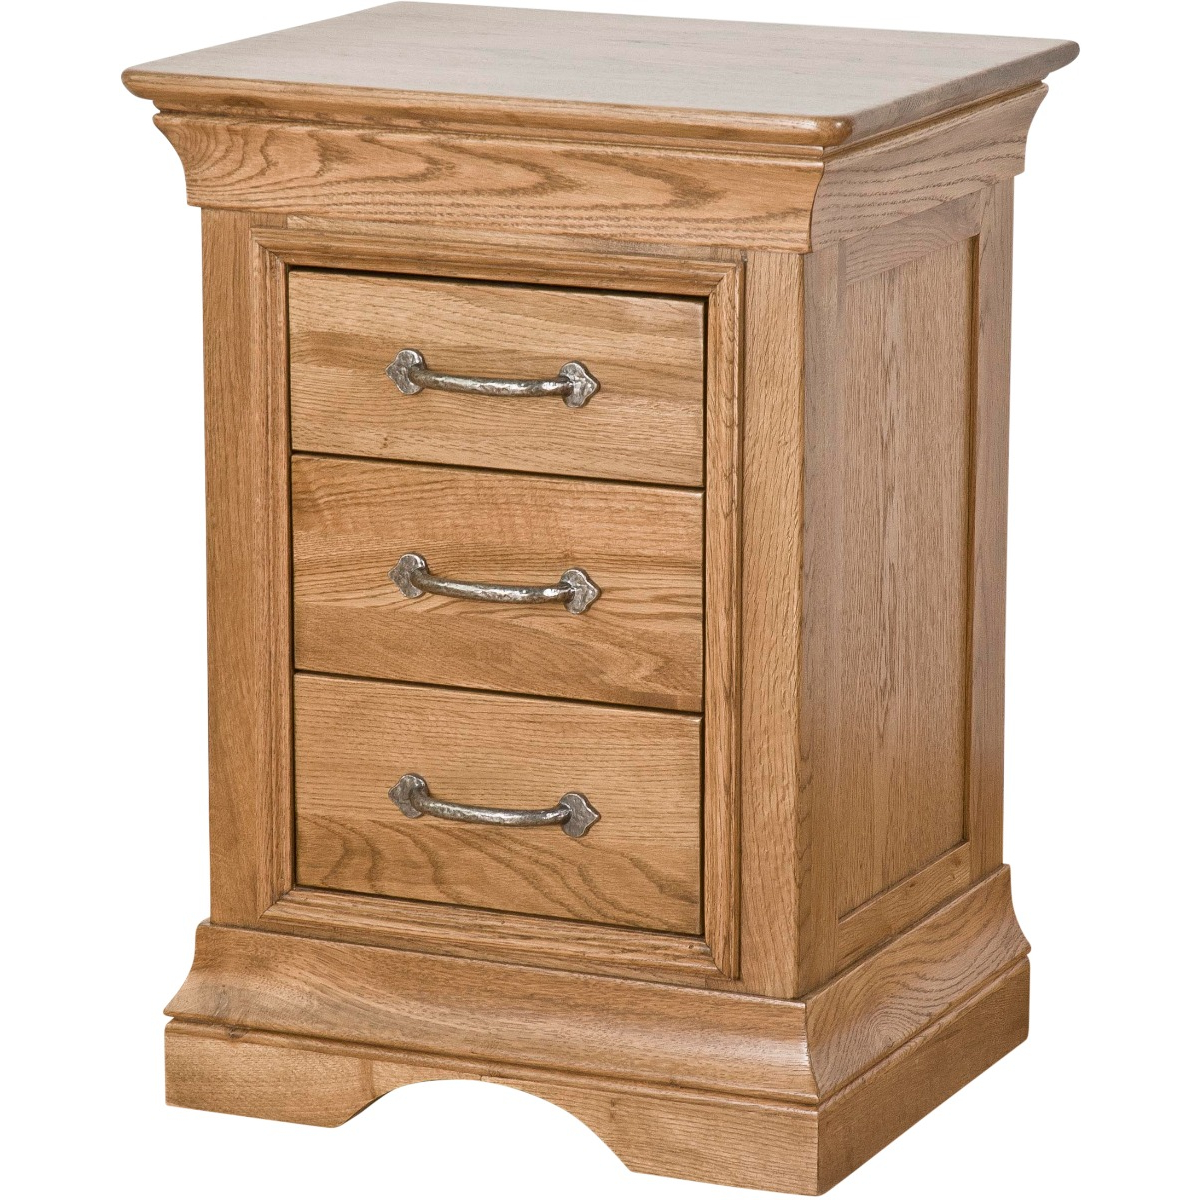 The Furniture Outlet Loire French Oak Dressing Stool 